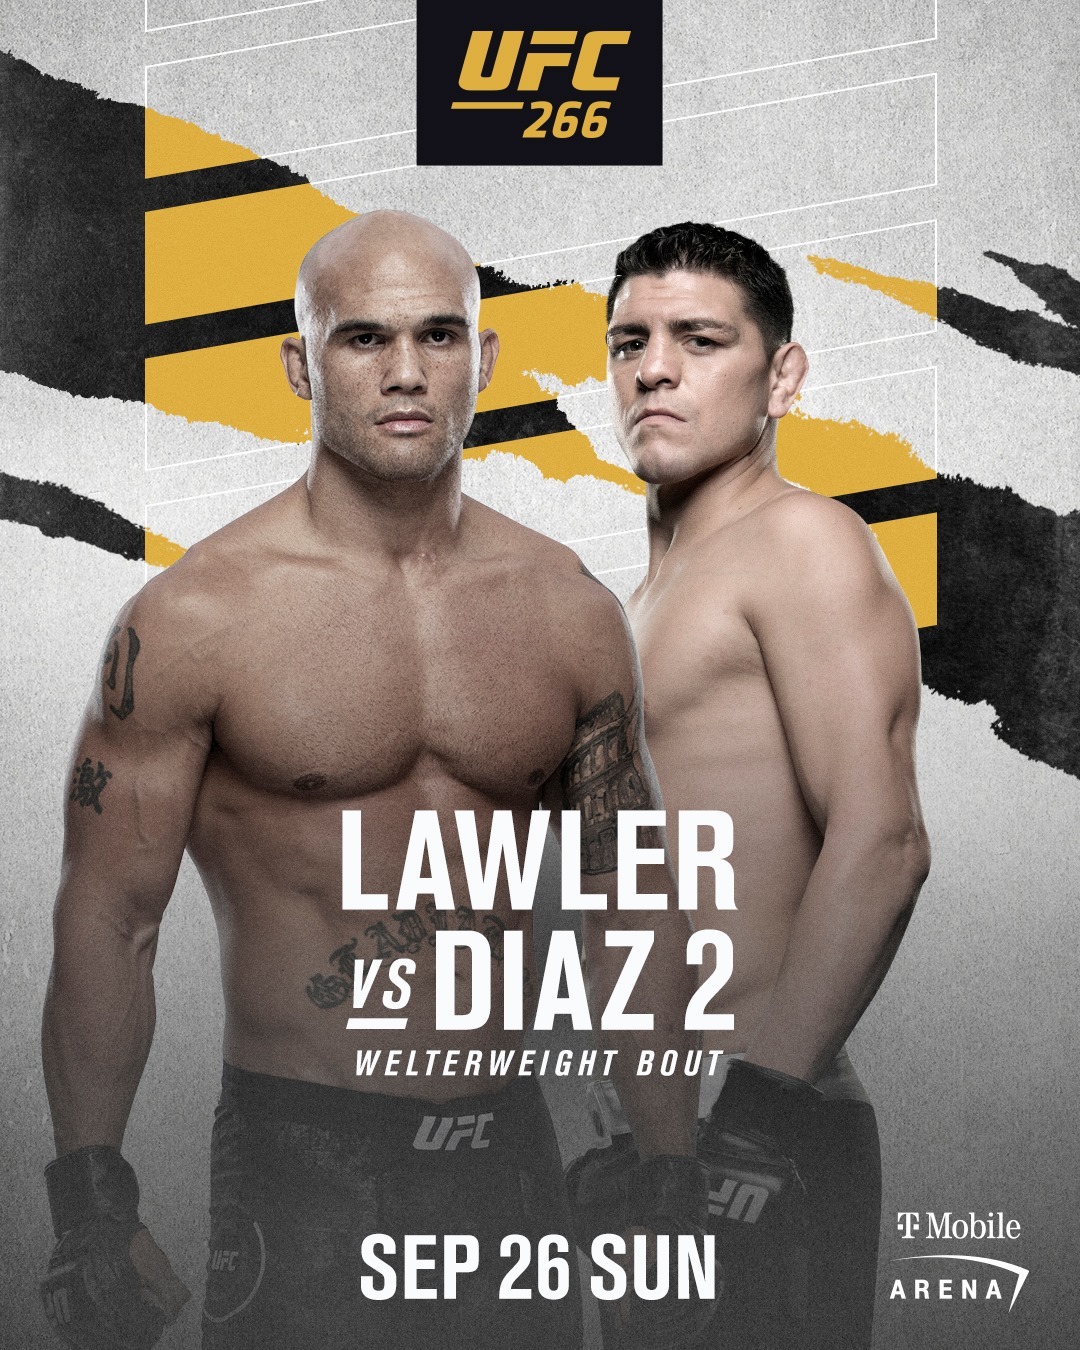 Robbie Lawler is 'not concerned' about being dropped from UFC after he loses the eagerly awaited UFC 266 rematch against Nick Diaz